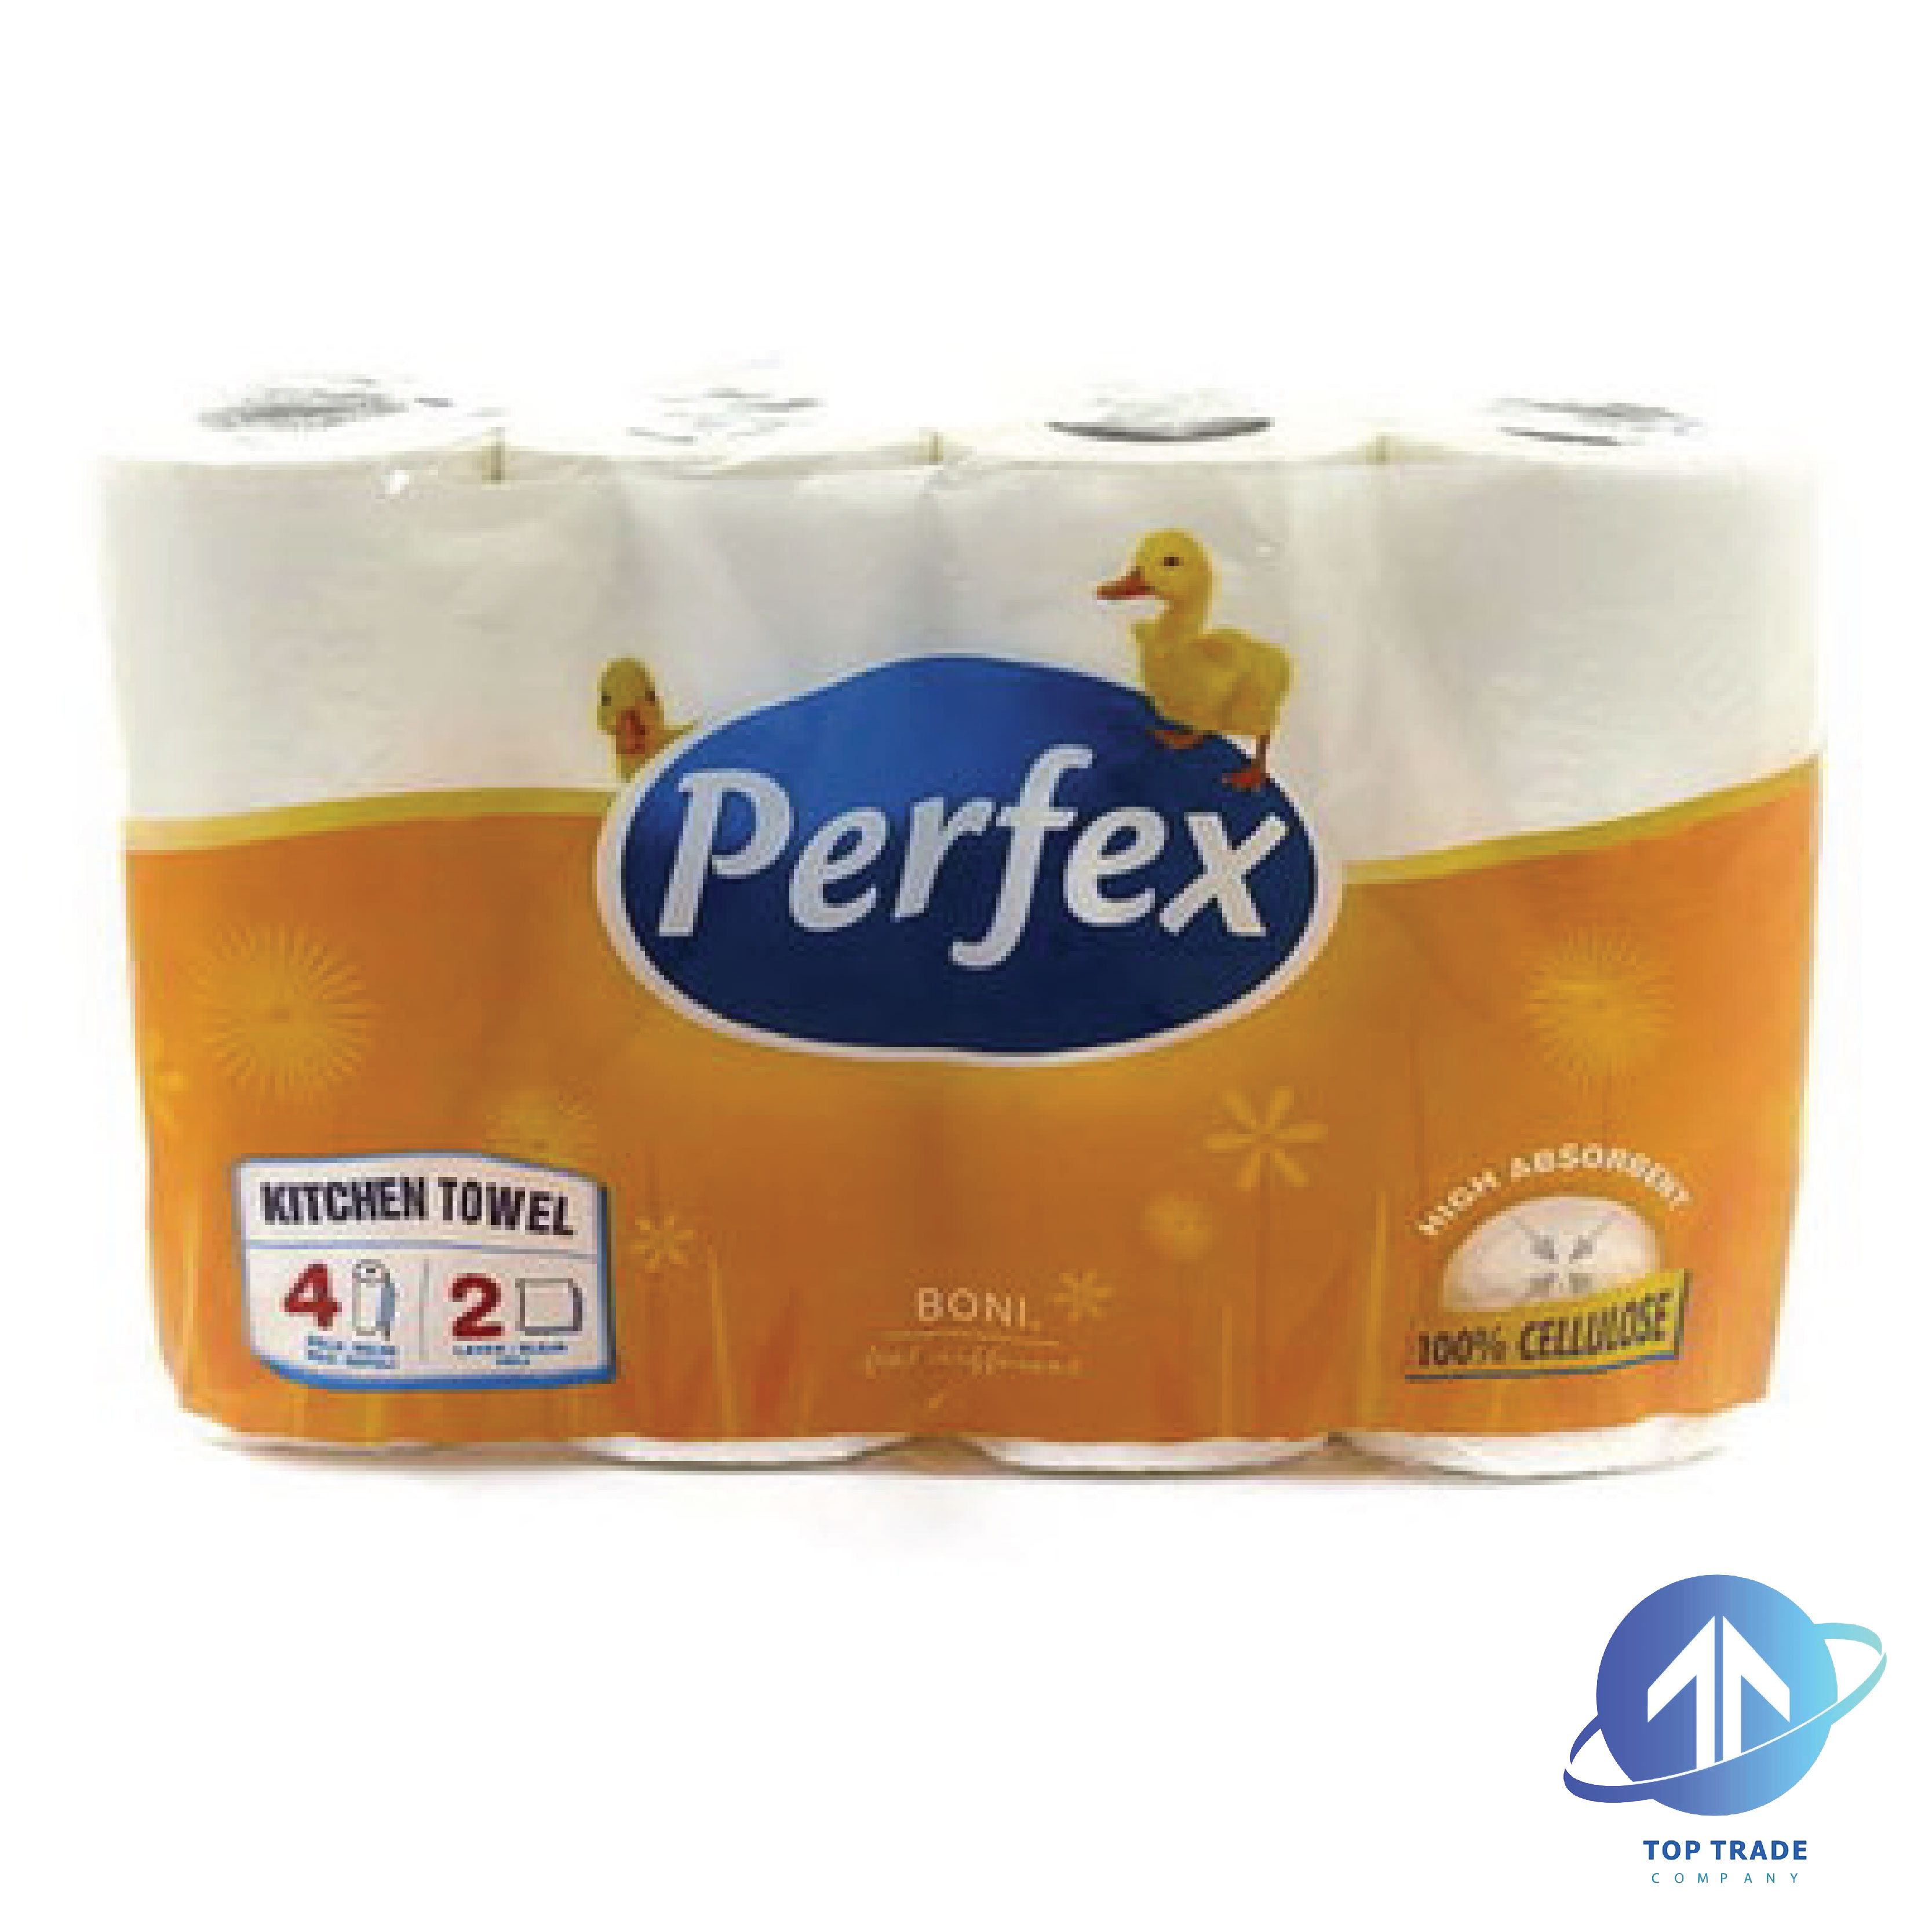 Perfex kitchen rolls 4 rolls 2 layers yellow pack labelled